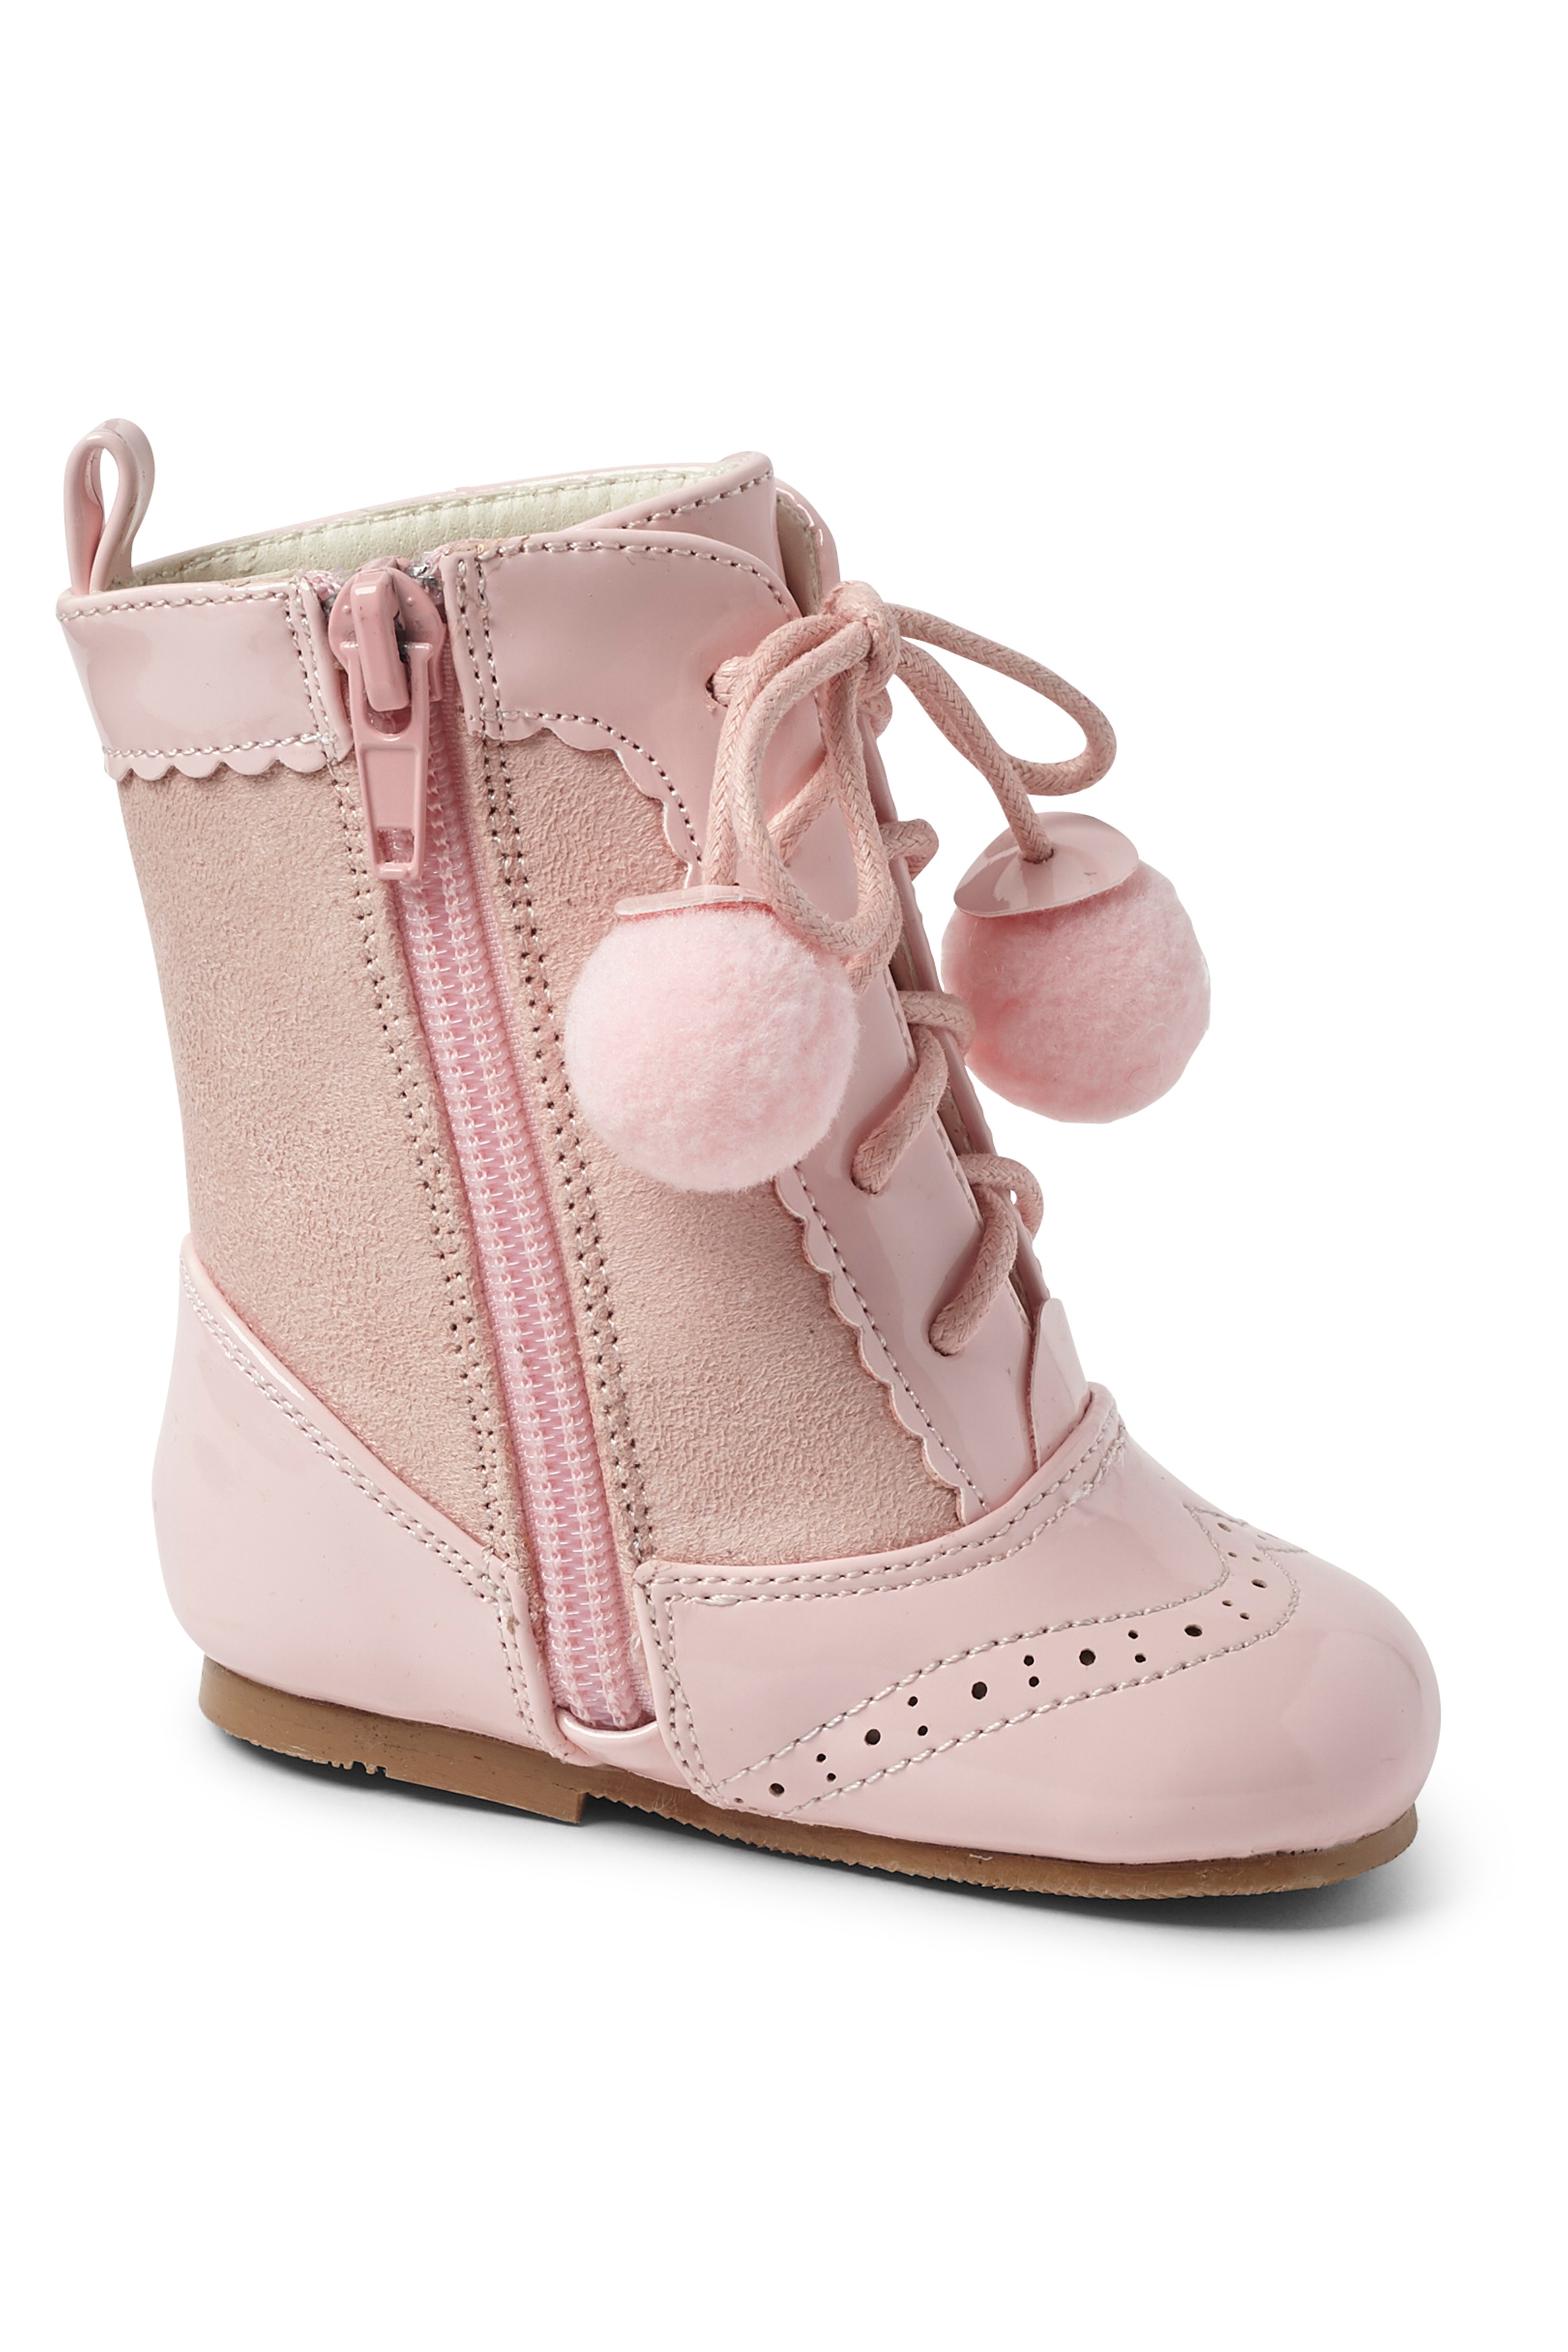 Kids Patent Leather Sienna Brogue Boots with Lace-Up and Pom-Pom Details, Unisex Classic Footwear - Pink